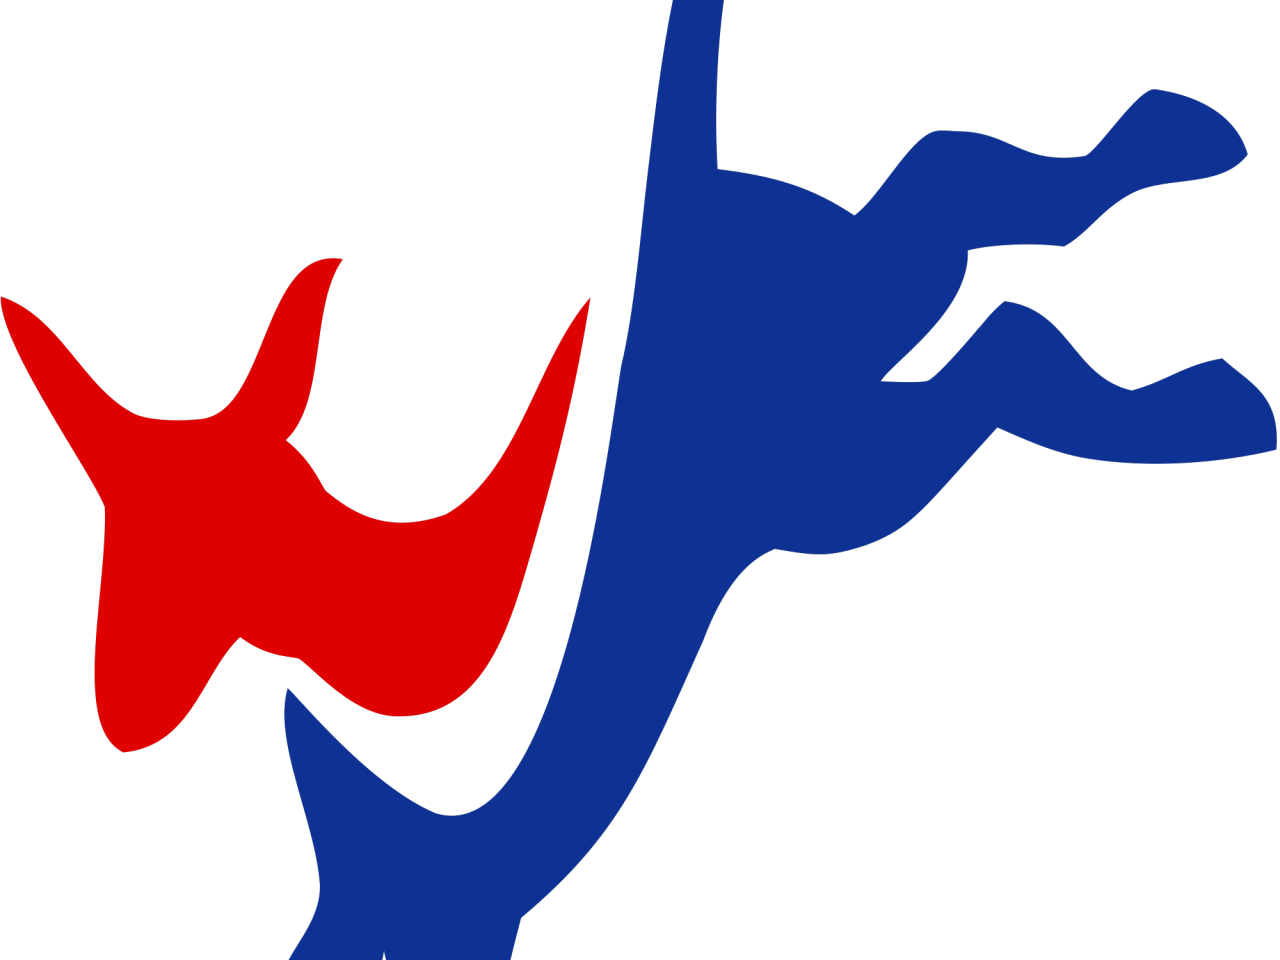 United States Democratic Party Political Party Republican - Democratic Party (1280x960)